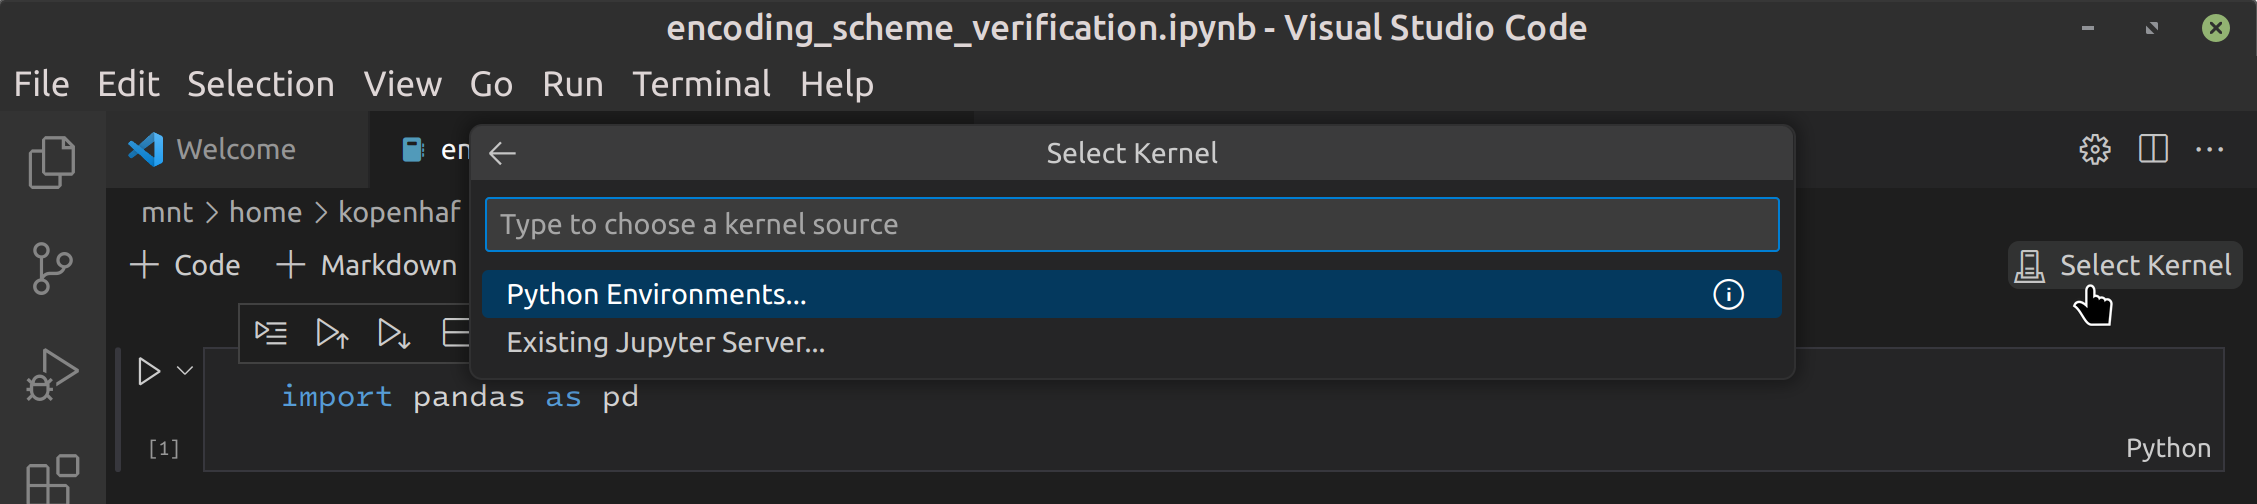 Screenshot of the VS Code Kernel Selection menu with "Python Environments..." highlighted